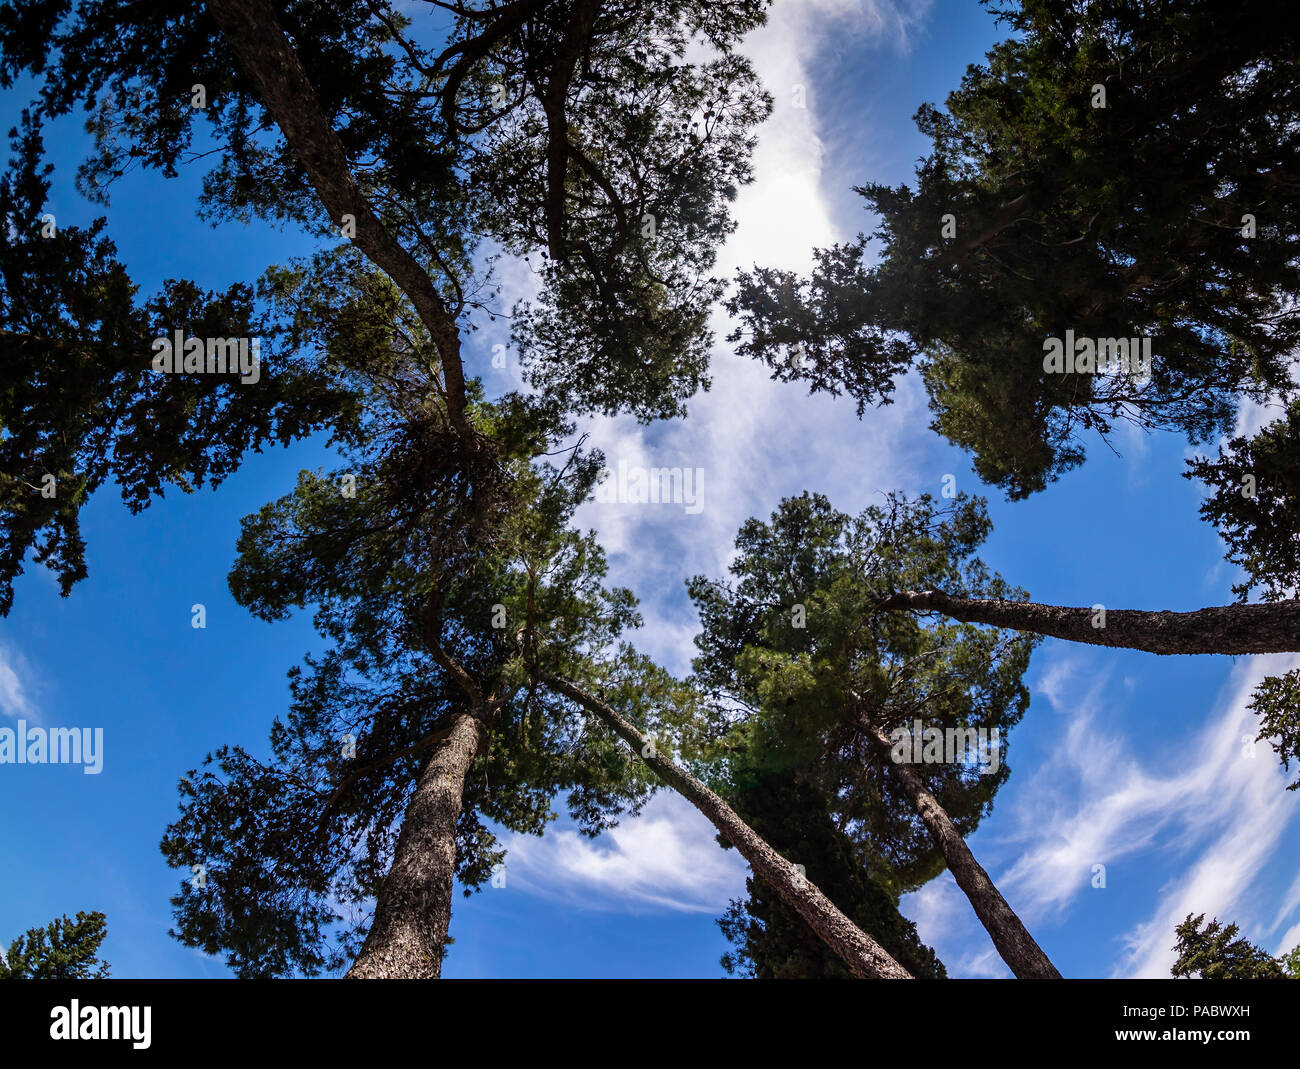 A group of Jerusalem pine trees, with a blue sky background Stock Photo